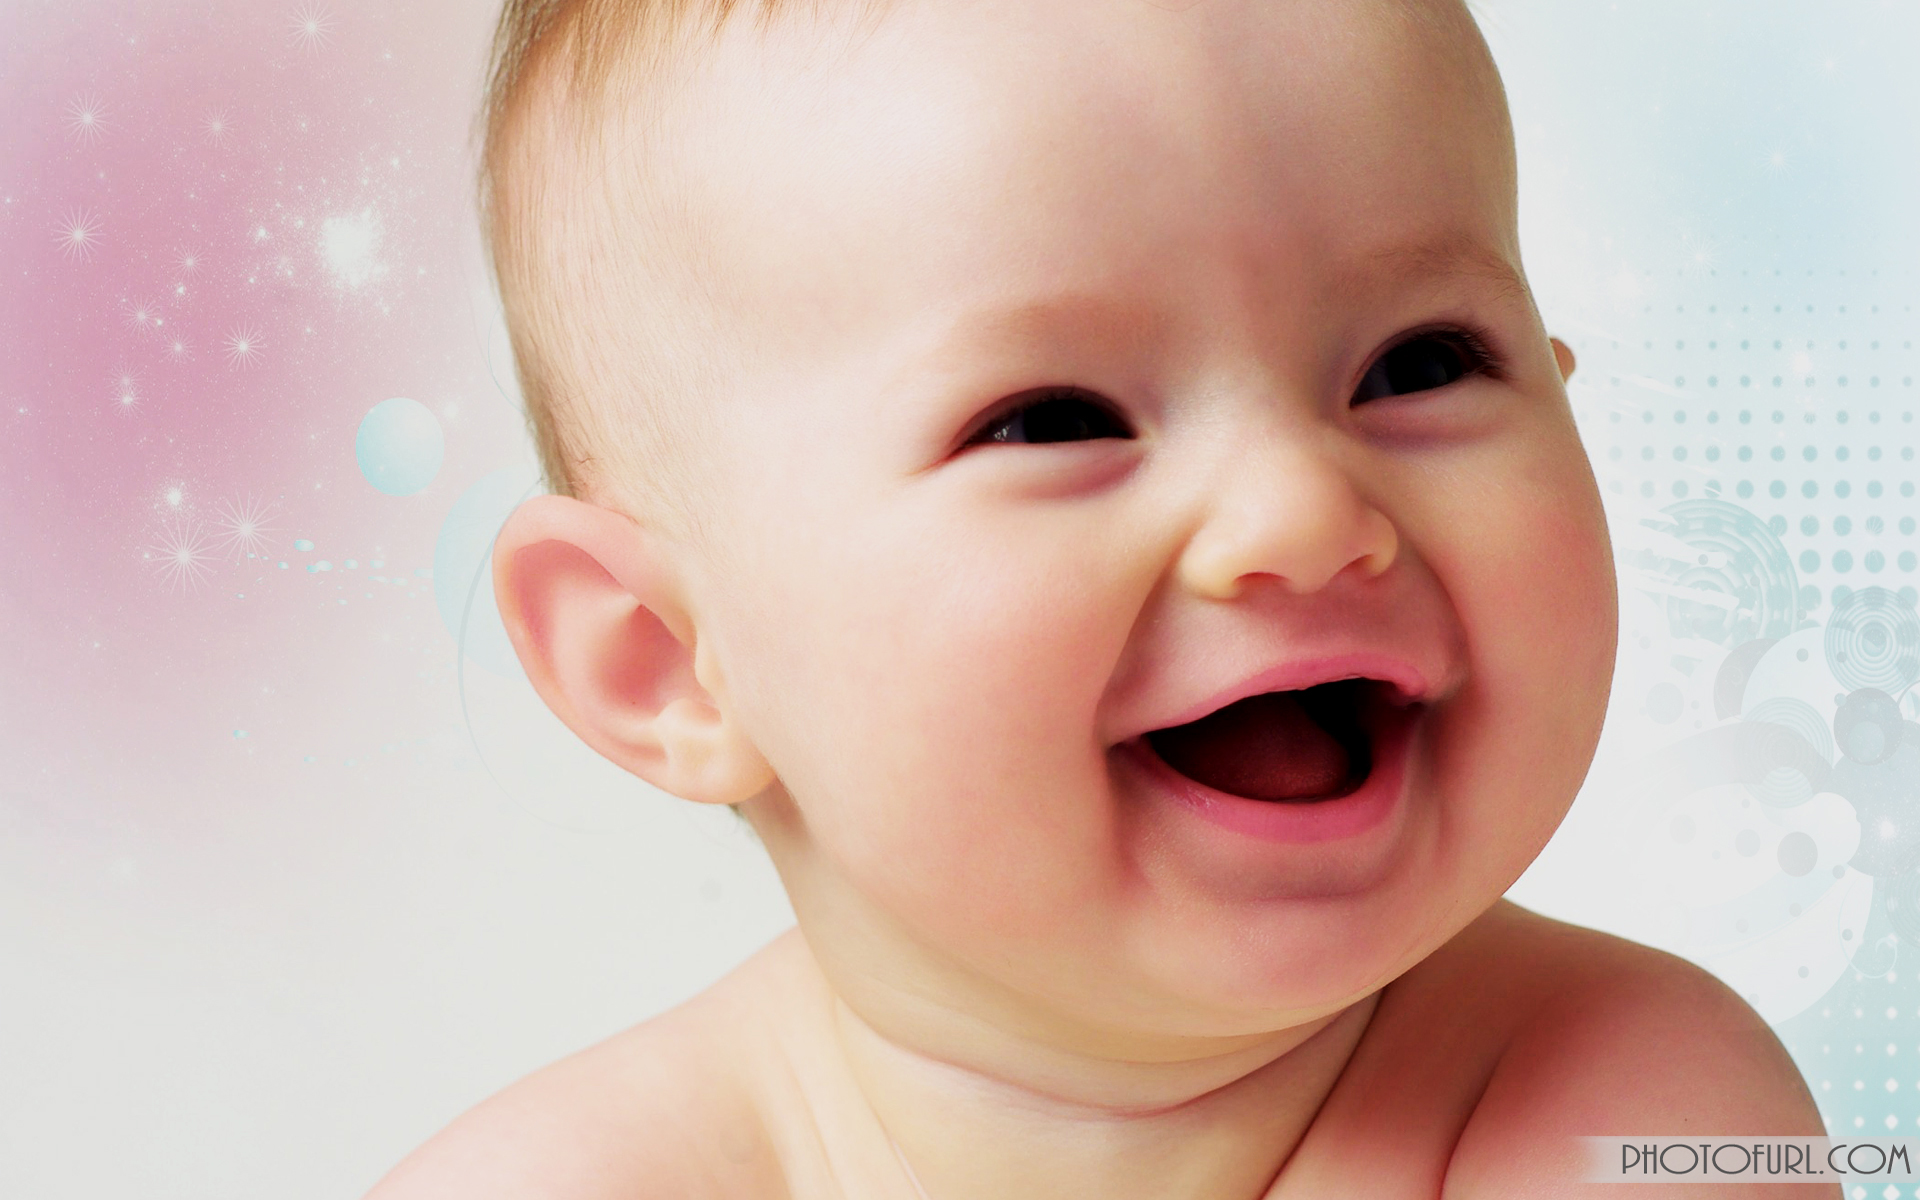 Smiling Baby Images Hd , HD Wallpaper & Backgrounds